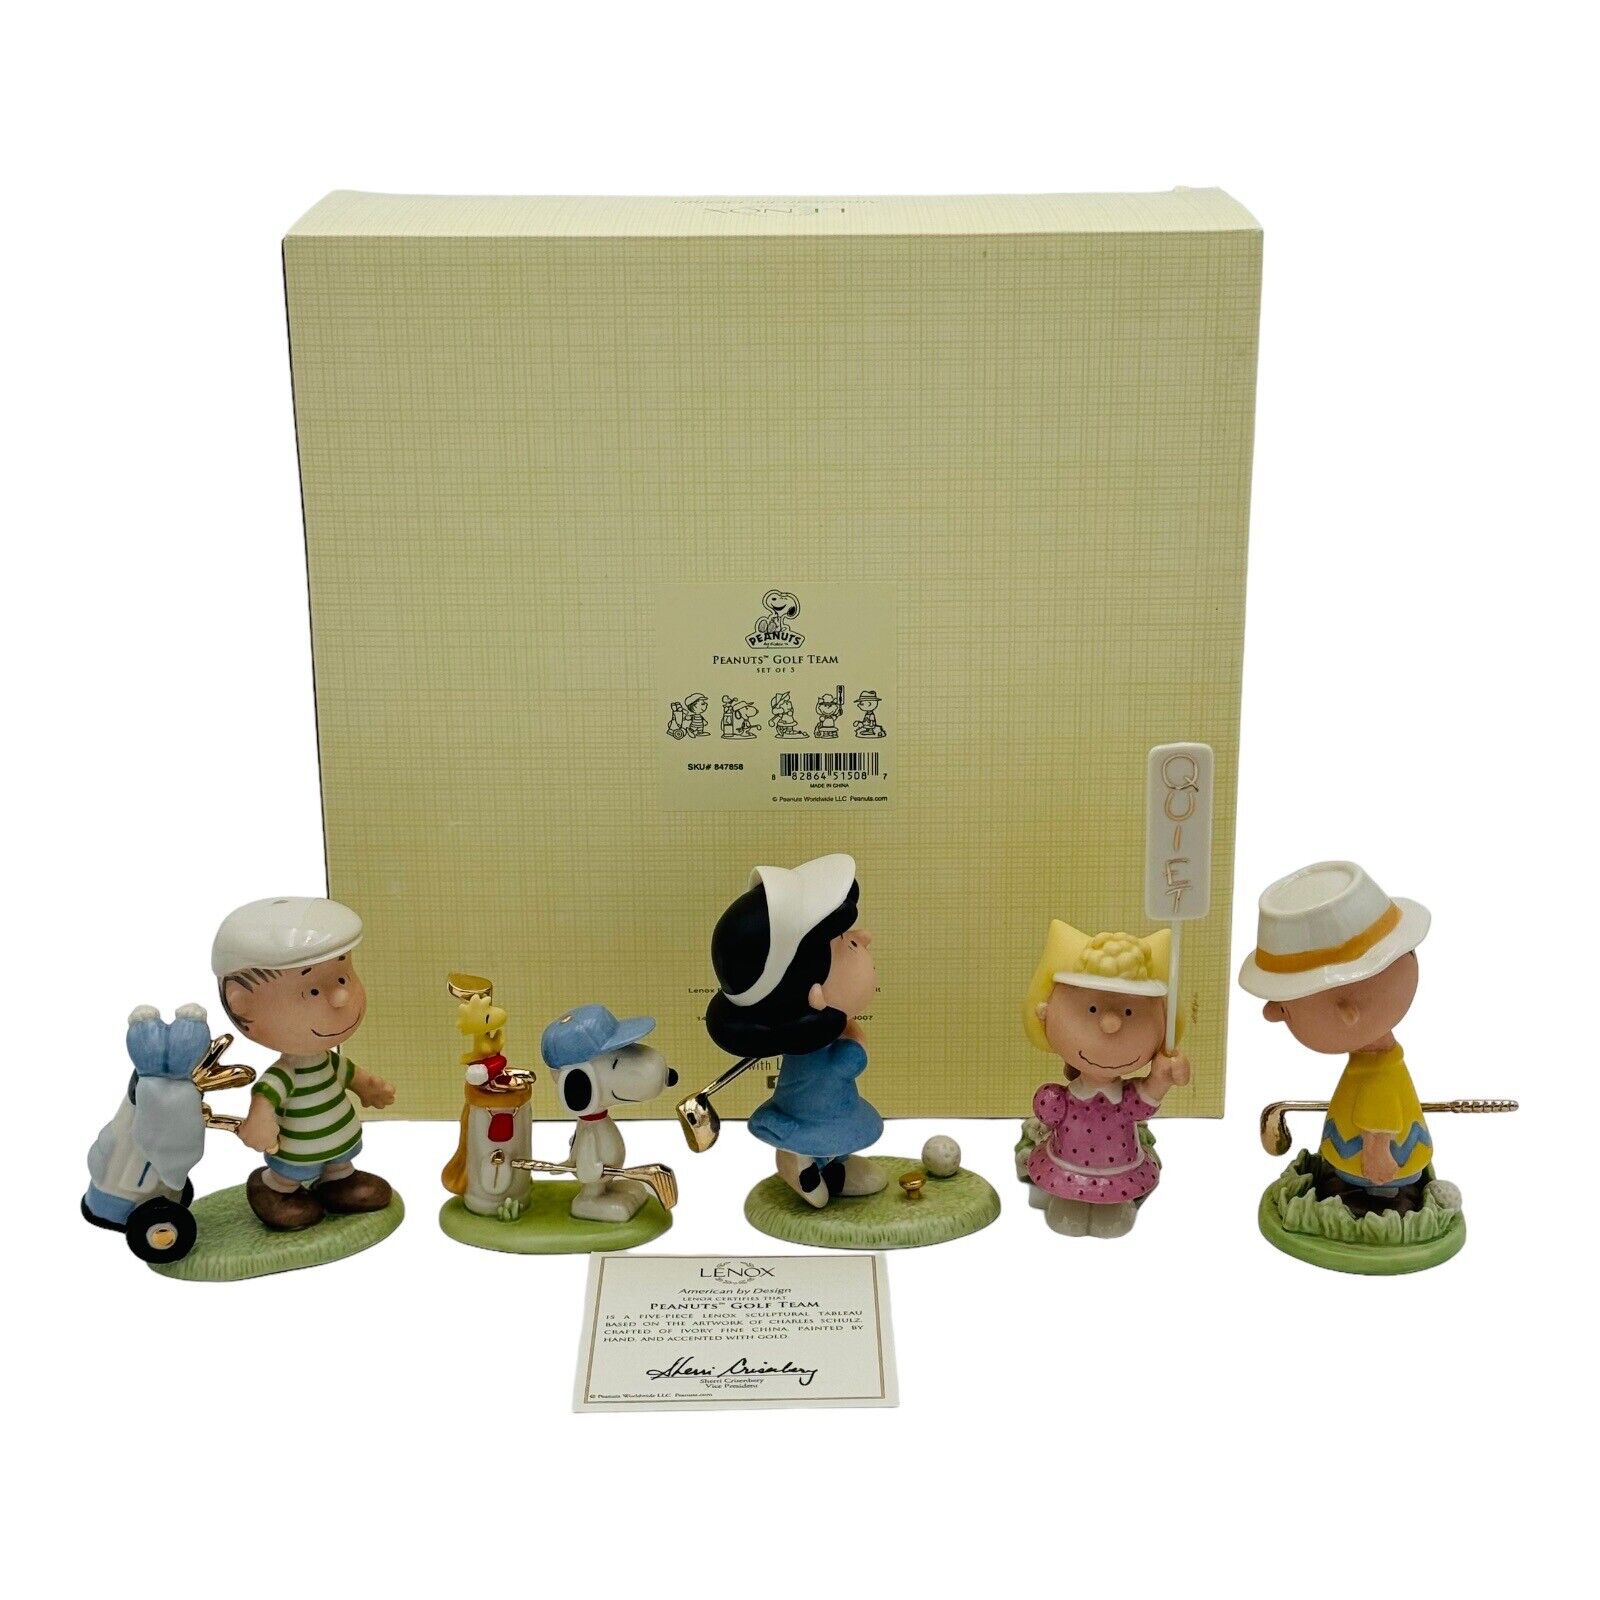 Lenox Peanuts Golf Team Set Of 5 Figurines Charlie Brown Lucy NEW IN BOX